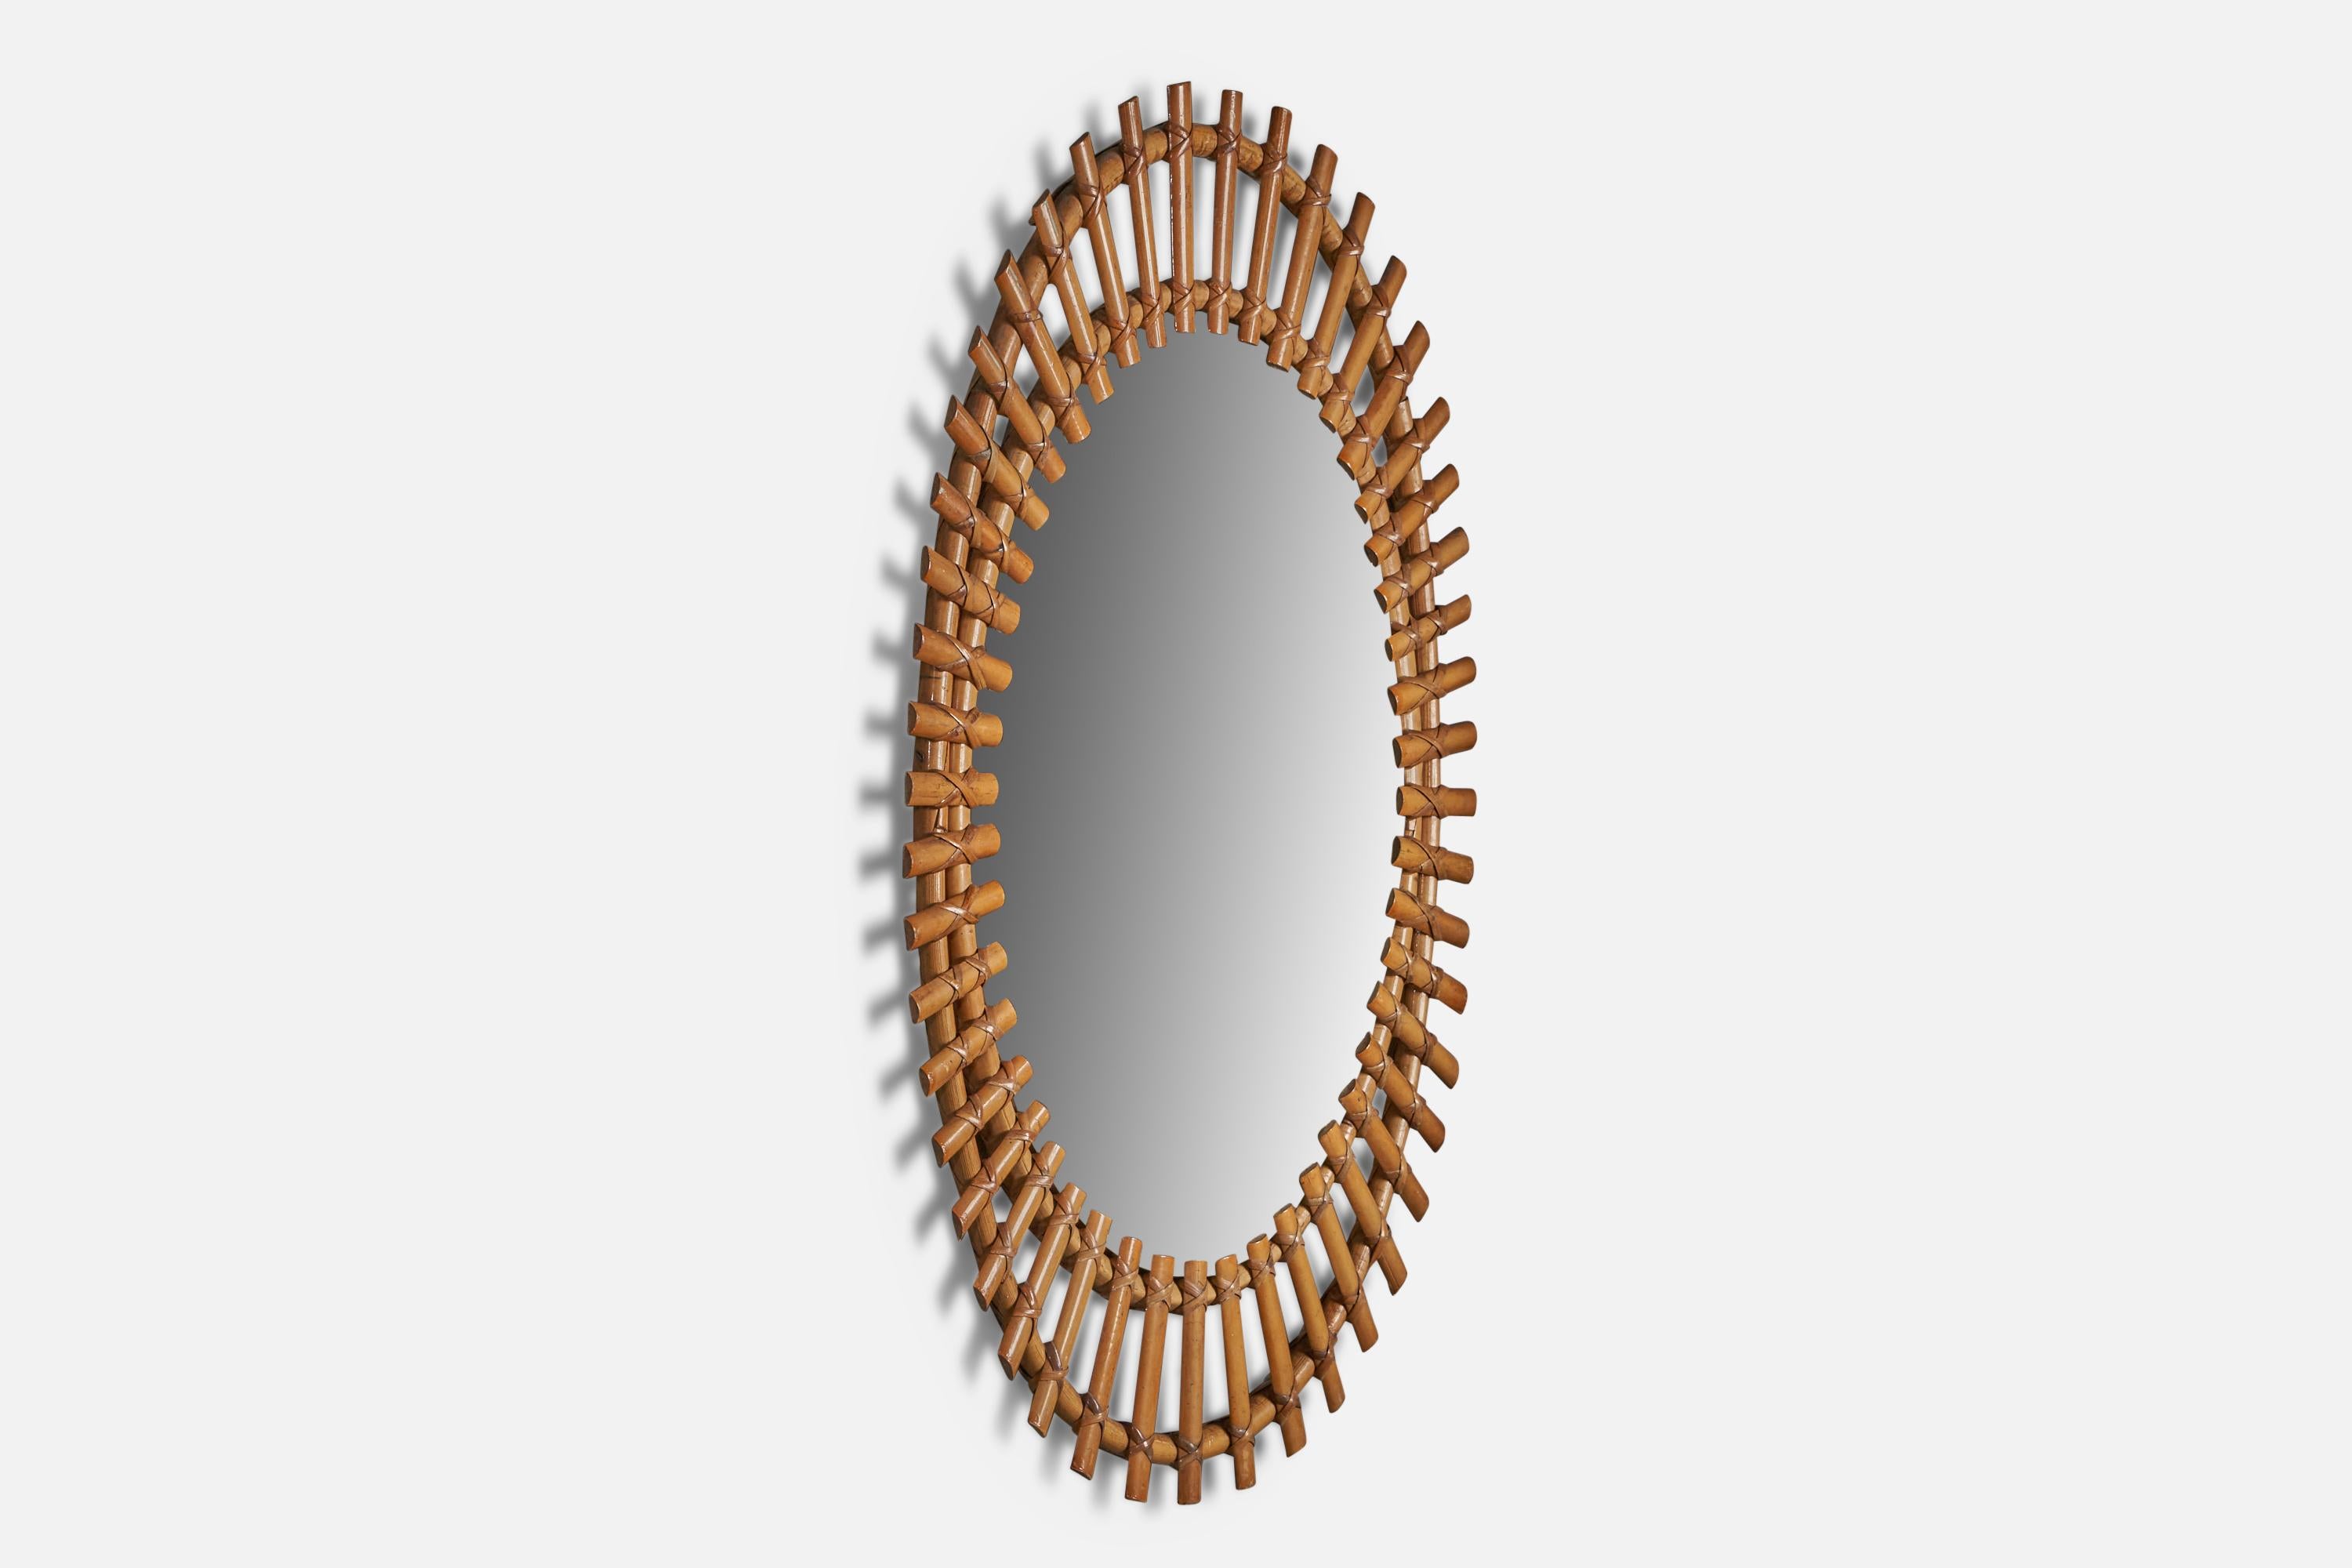 A bamboo and rattan wall mirror, designed and produced in Italy, 1950s.